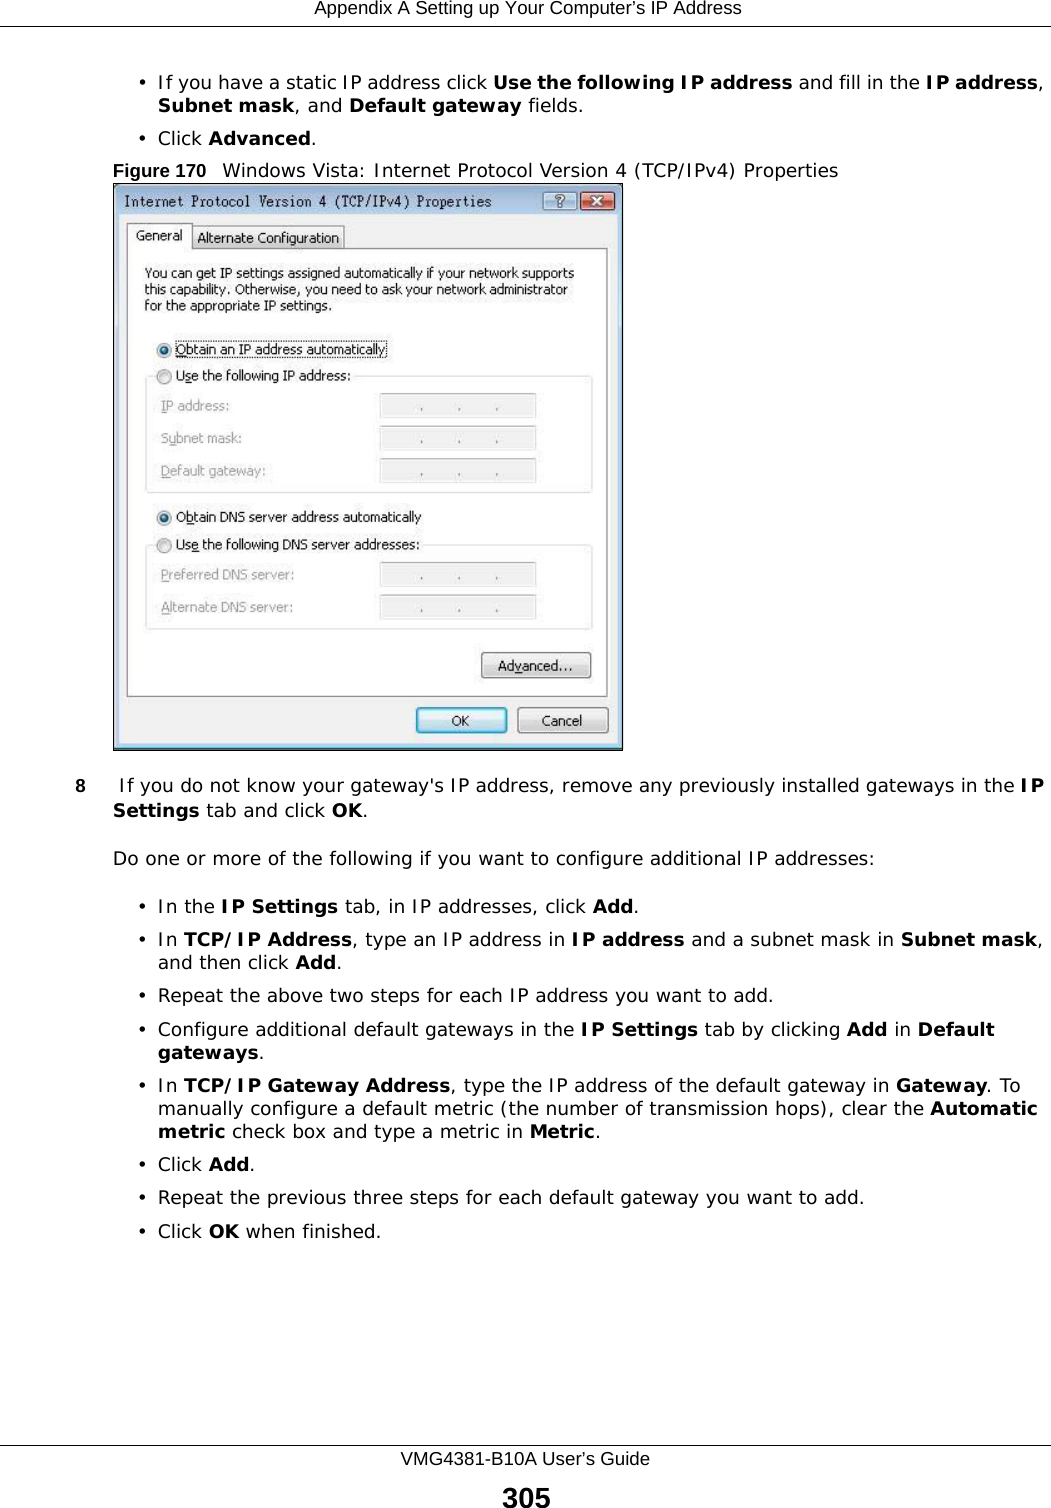  Appendix A Setting up Your Computer’s IP AddressVMG4381-B10A User’s Guide305• If you have a static IP address click Use the following IP address and fill in the IP address, Subnet mask, and Default gateway fields. • Click Advanced.Figure 170   Windows Vista: Internet Protocol Version 4 (TCP/IPv4) Properties8 If you do not know your gateway&apos;s IP address, remove any previously installed gateways in the IP Settings tab and click OK.Do one or more of the following if you want to configure additional IP addresses:•In the IP Settings tab, in IP addresses, click Add.•In TCP/IP Address, type an IP address in IP address and a subnet mask in Subnet mask, and then click Add.• Repeat the above two steps for each IP address you want to add.• Configure additional default gateways in the IP Settings tab by clicking Add in Default gateways.•In TCP/IP Gateway Address, type the IP address of the default gateway in Gateway. To manually configure a default metric (the number of transmission hops), clear the Automatic metric check box and type a metric in Metric.• Click Add. • Repeat the previous three steps for each default gateway you want to add.• Click OK when finished.